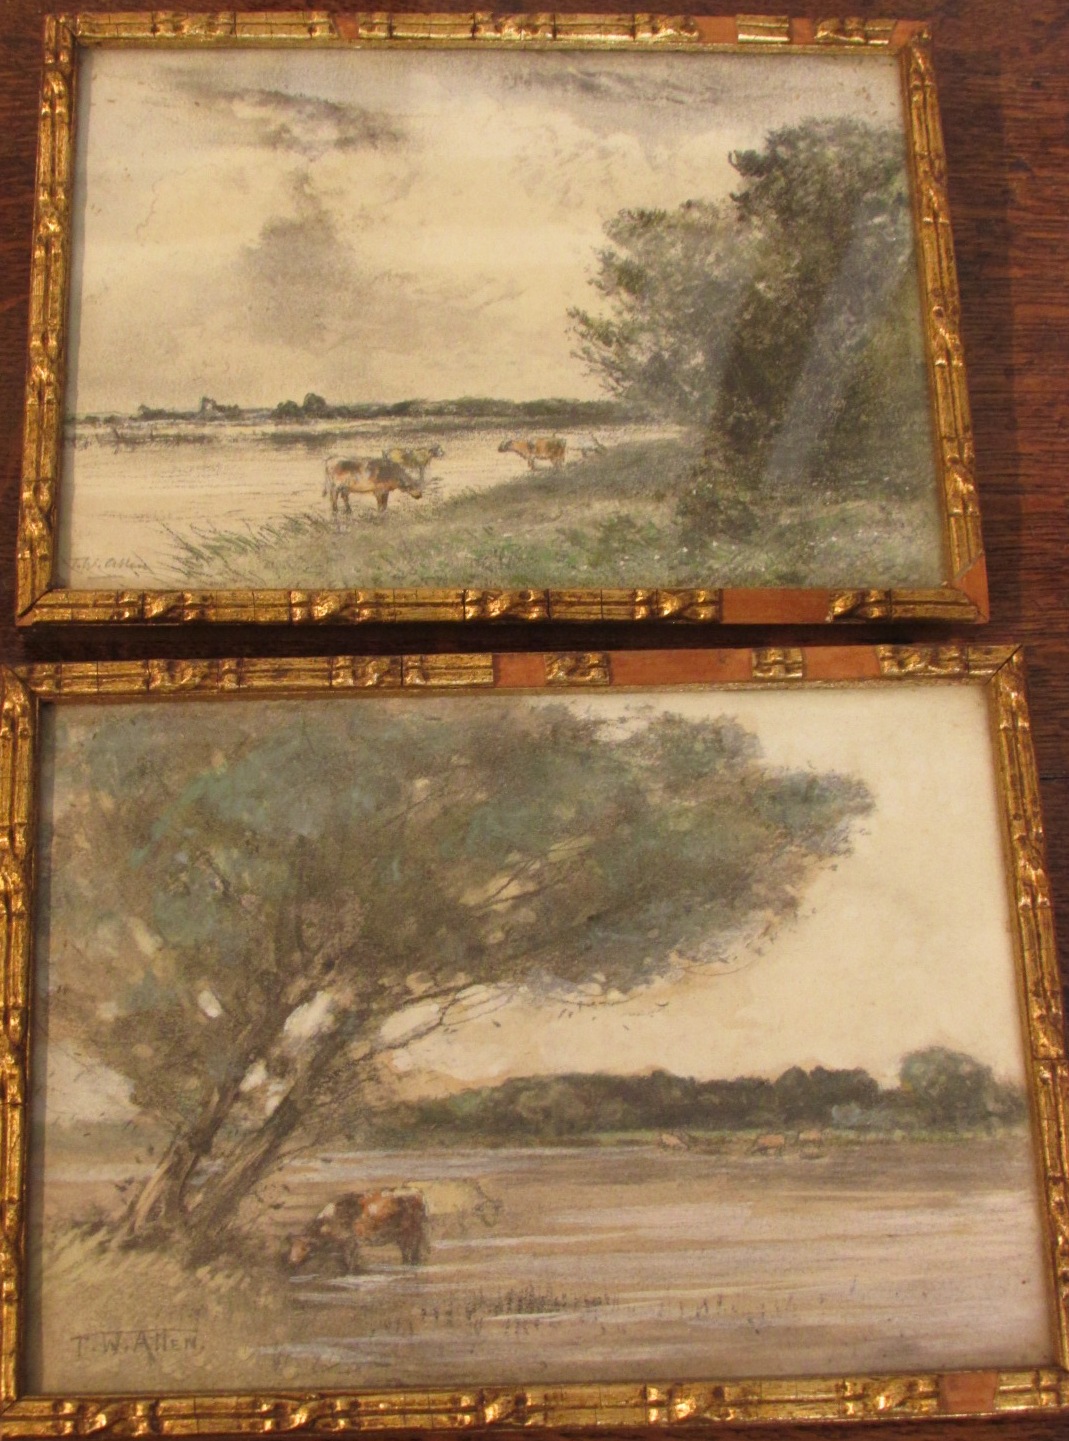 Two watercolour and graphite sketches of watering cattle, each 12.5cm x 17.5cm and signed T. W.